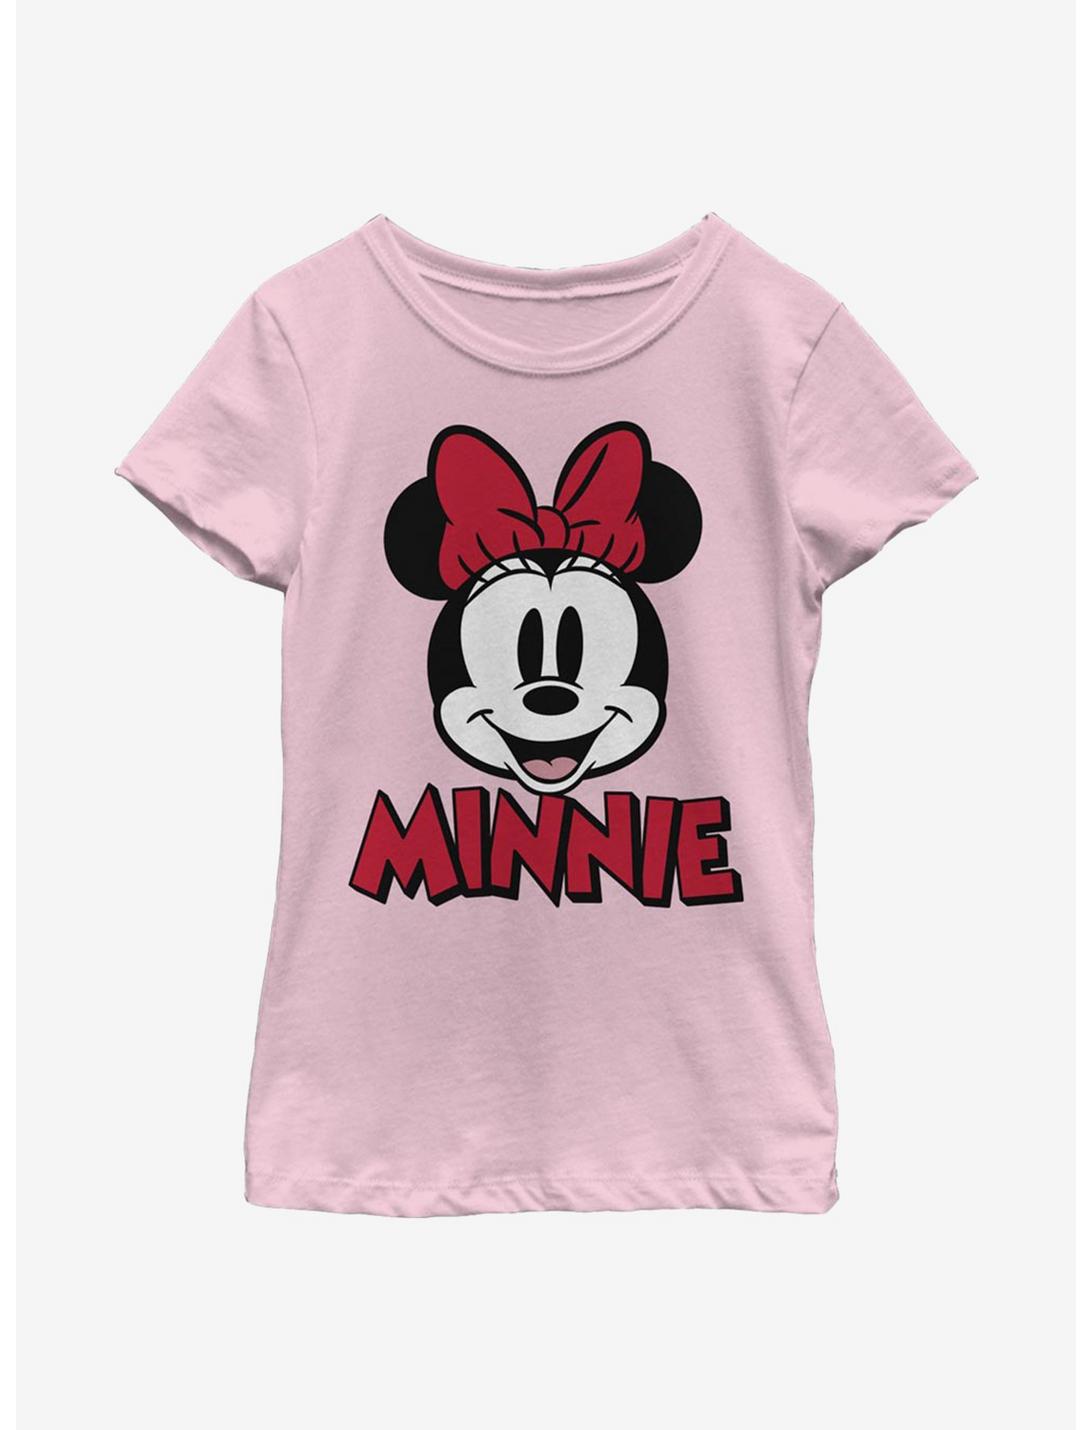 Disney Minnie Mouse Classic Patch Youth Girls T-Shirt, PINK, hi-res